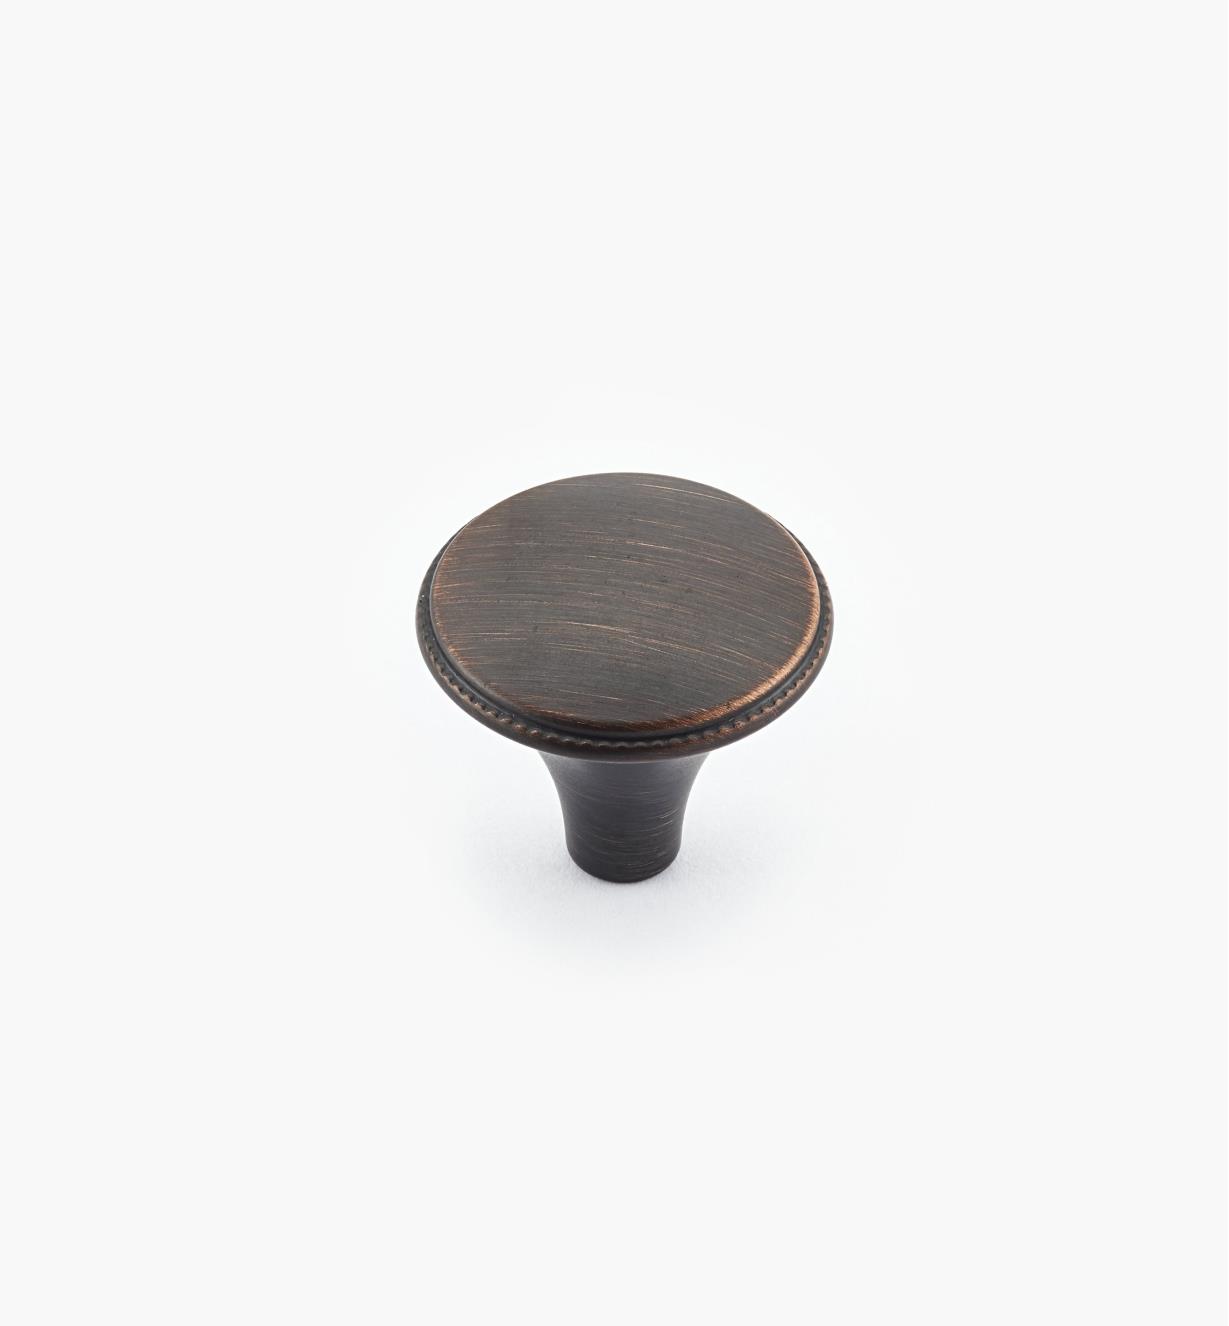 02A1570 - Atherly Hardware –Oil-Rubbed Bronze Round Knob, 1 3/16"